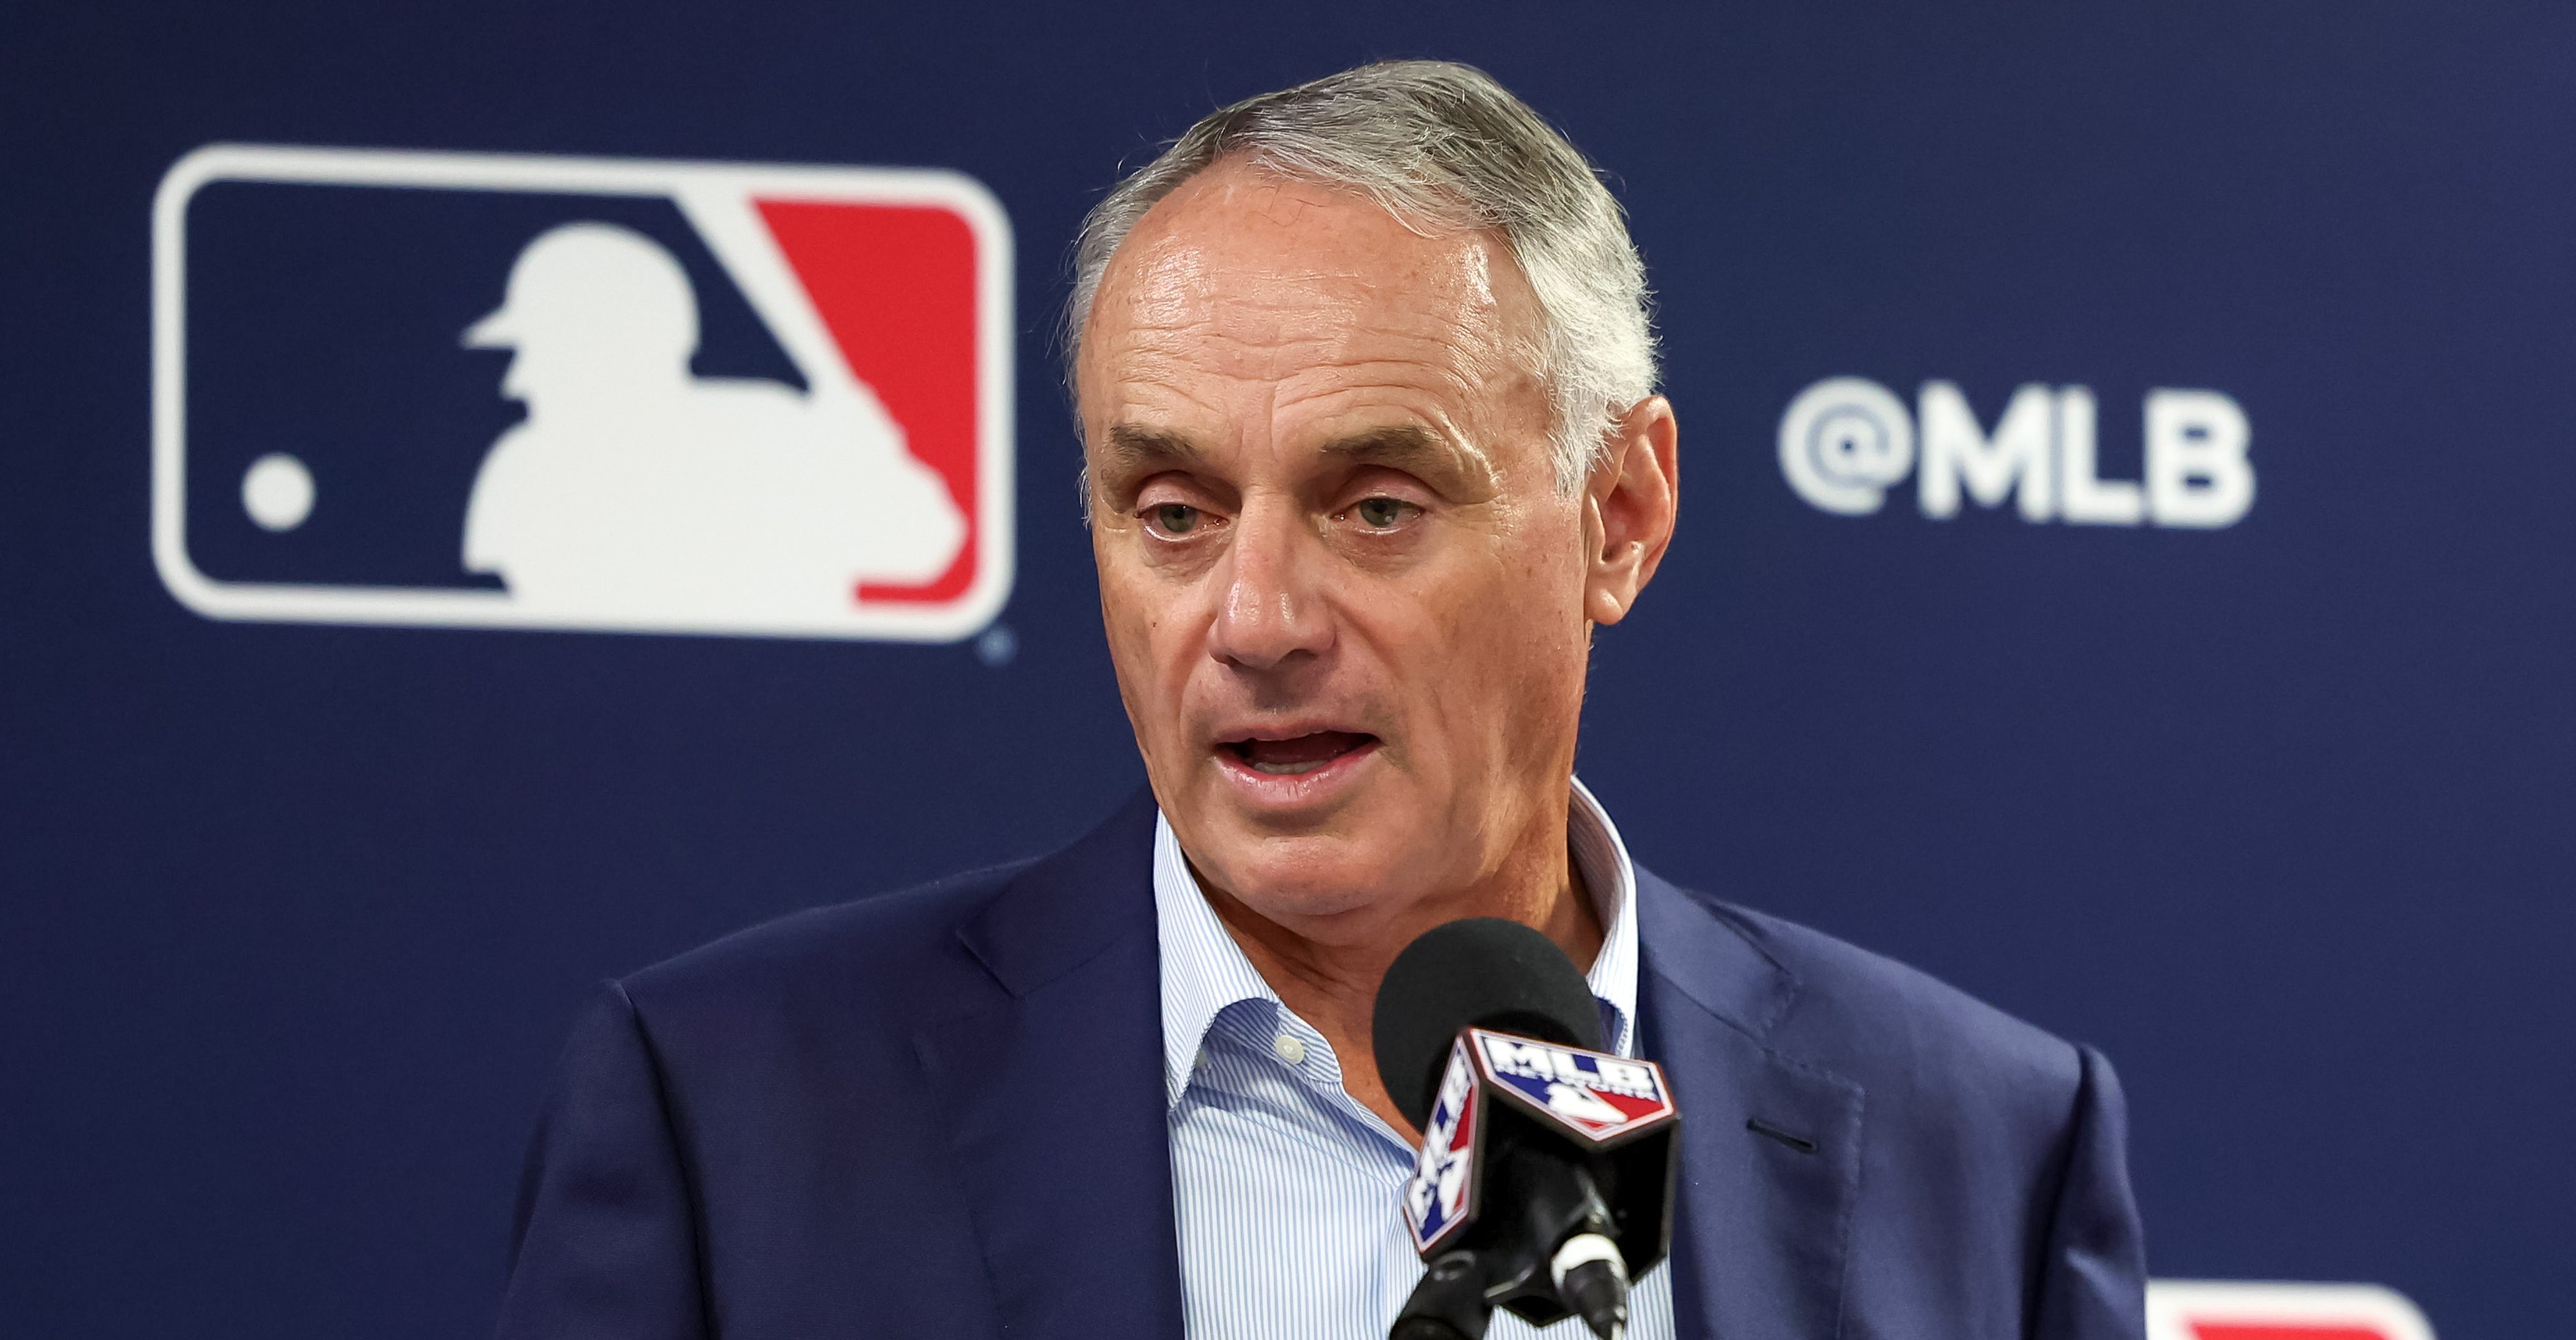 MLB Commissioner Rob Manfred remains open to major leaguers in 2028 Los Angeles Olympics